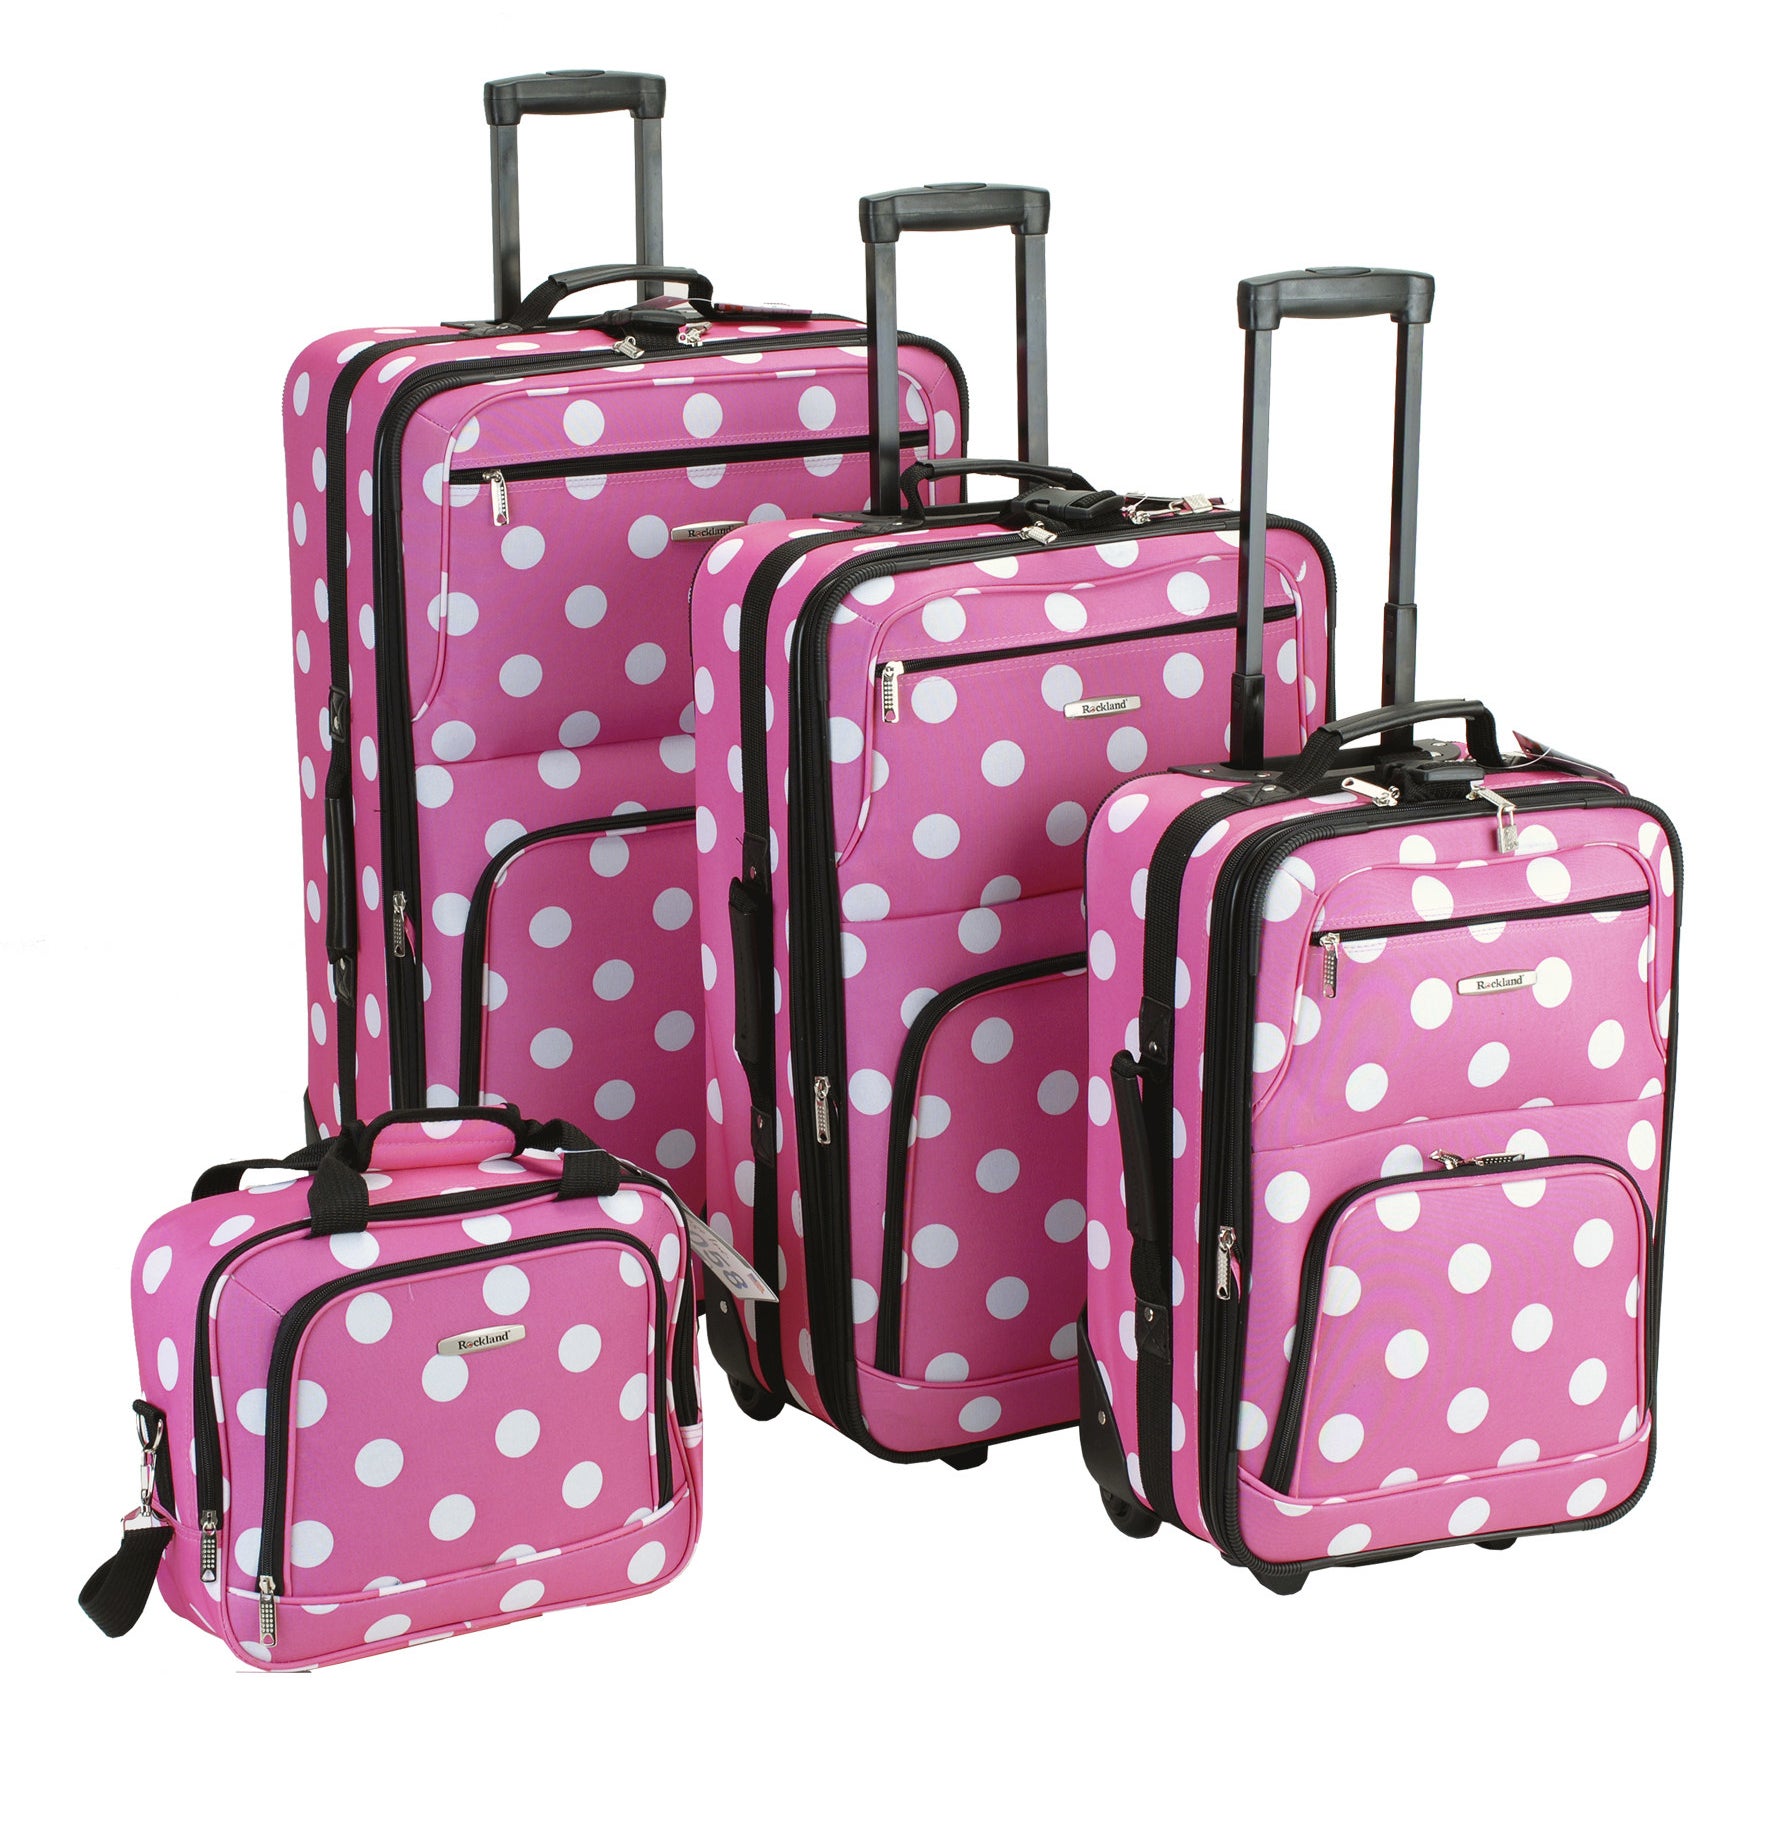 An image of a four-piece soft side expandable luggage set